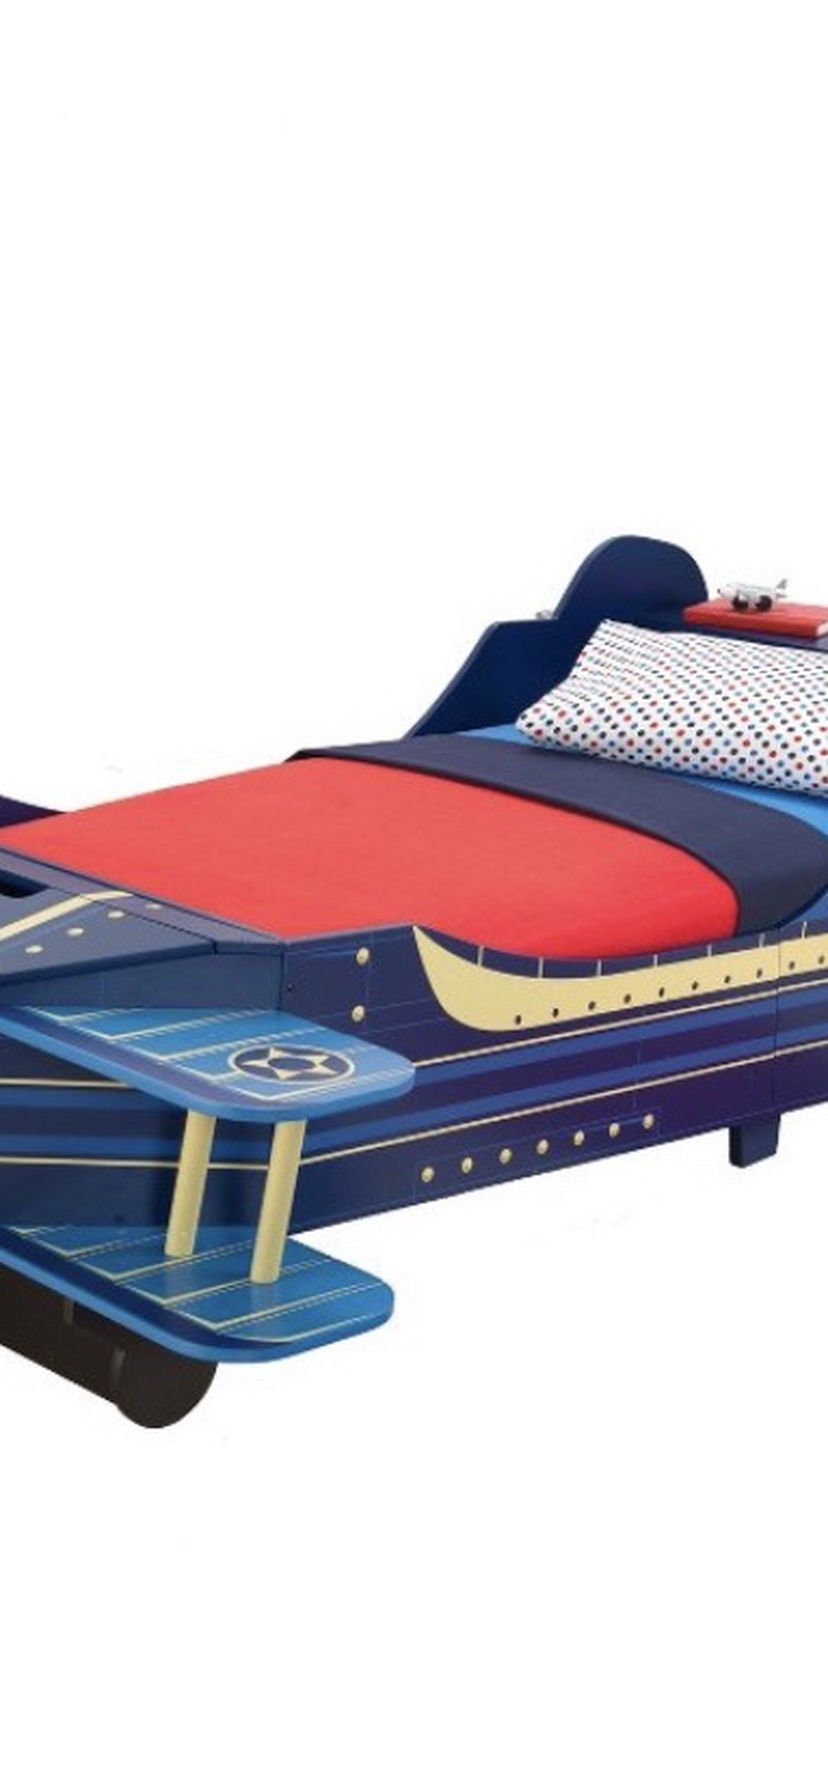 Toddler Airplane bed For Sale!